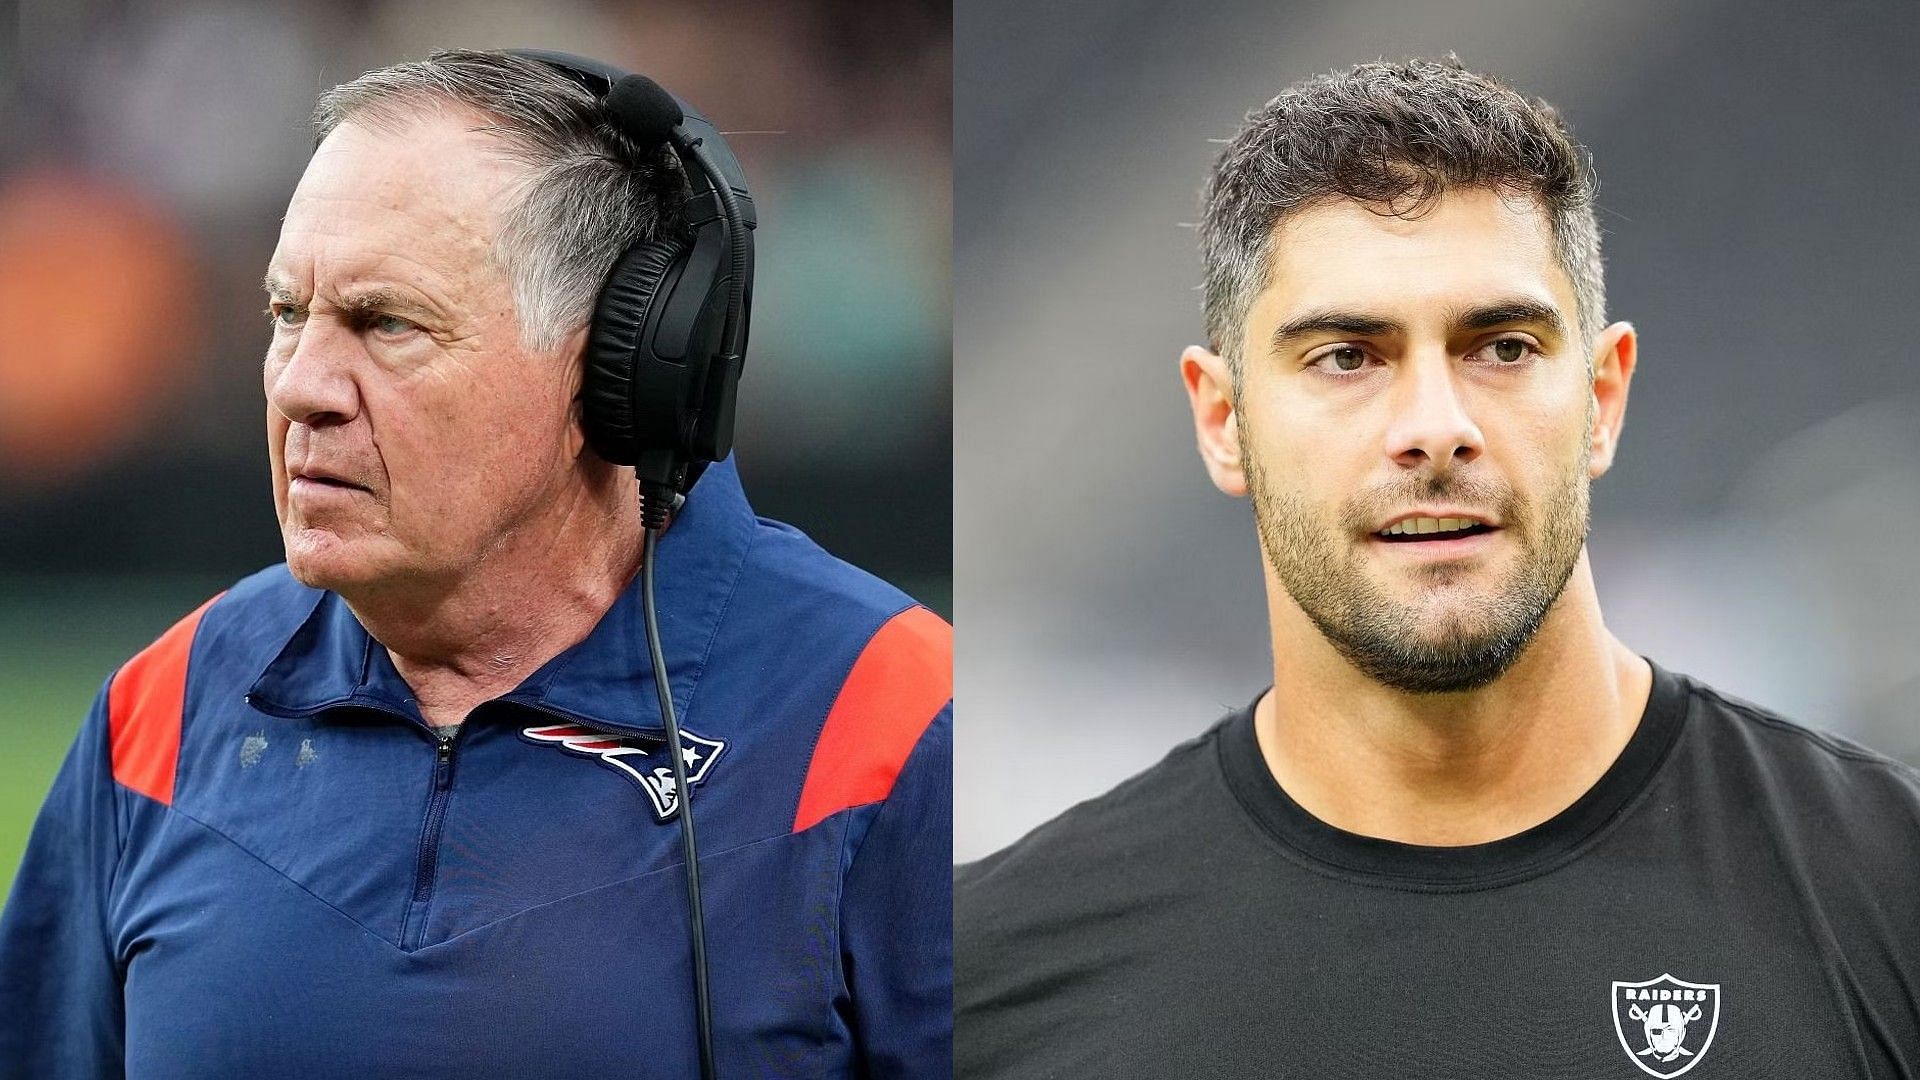 Bill Belichick&rsquo;s former rival pounces on Patriots after losing to Jimmy Garoppolo&rsquo;s backup QB